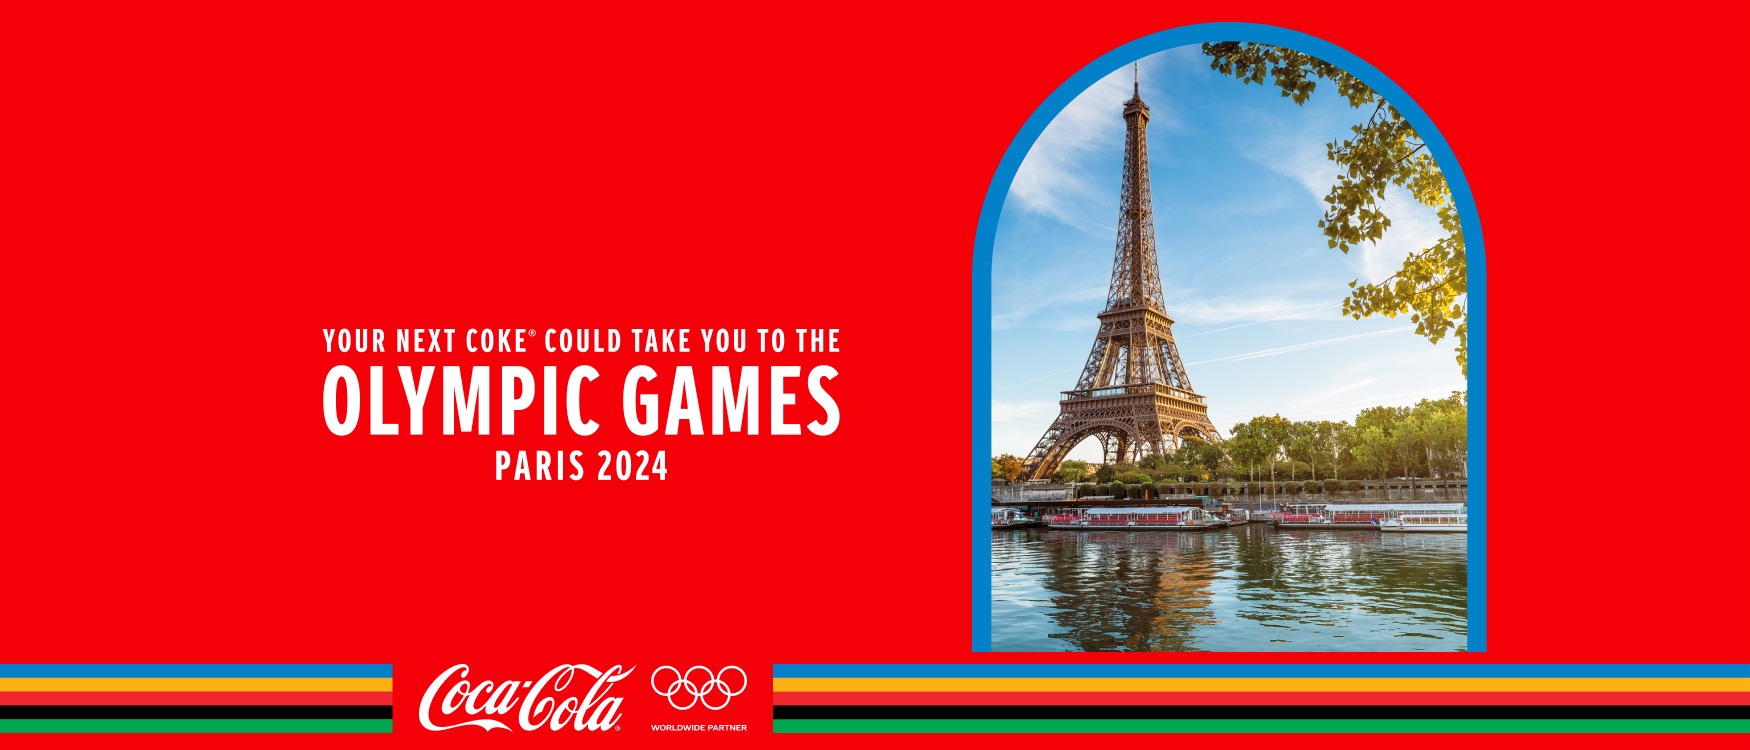 Win 1 of 3 Olympic Games Paris 2024 Experiences!